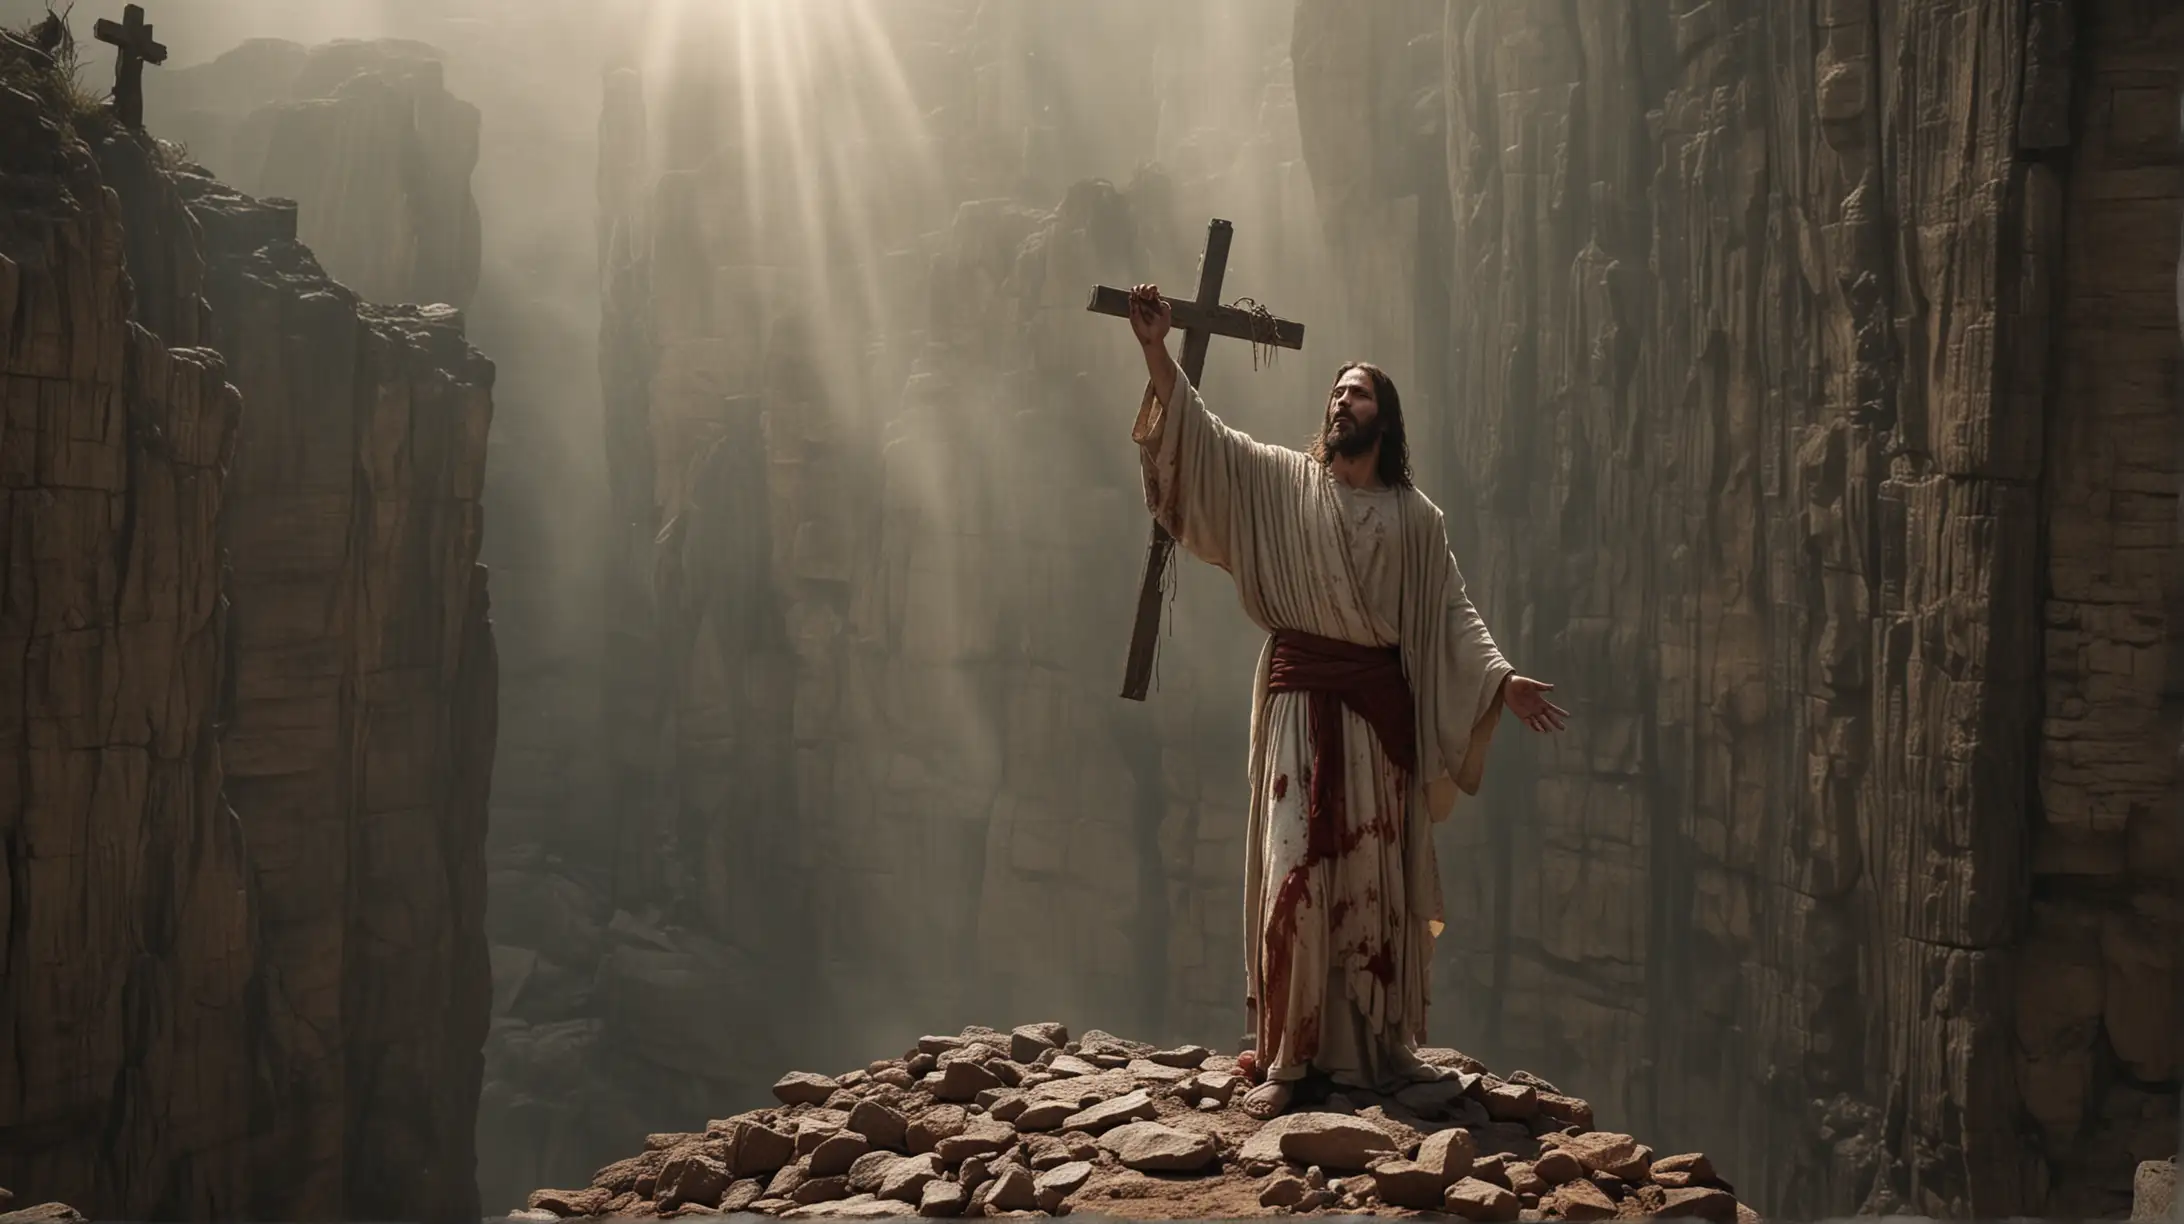 jesus, at the cross, blood shade, scars in hand, heaven roar, on top of stone cliff, wood cross, nails, from above, 1000 angels background, lightning strike, INRI, surrounded 100 jewish, epic. cinematic, so many blood, holy spirit down

